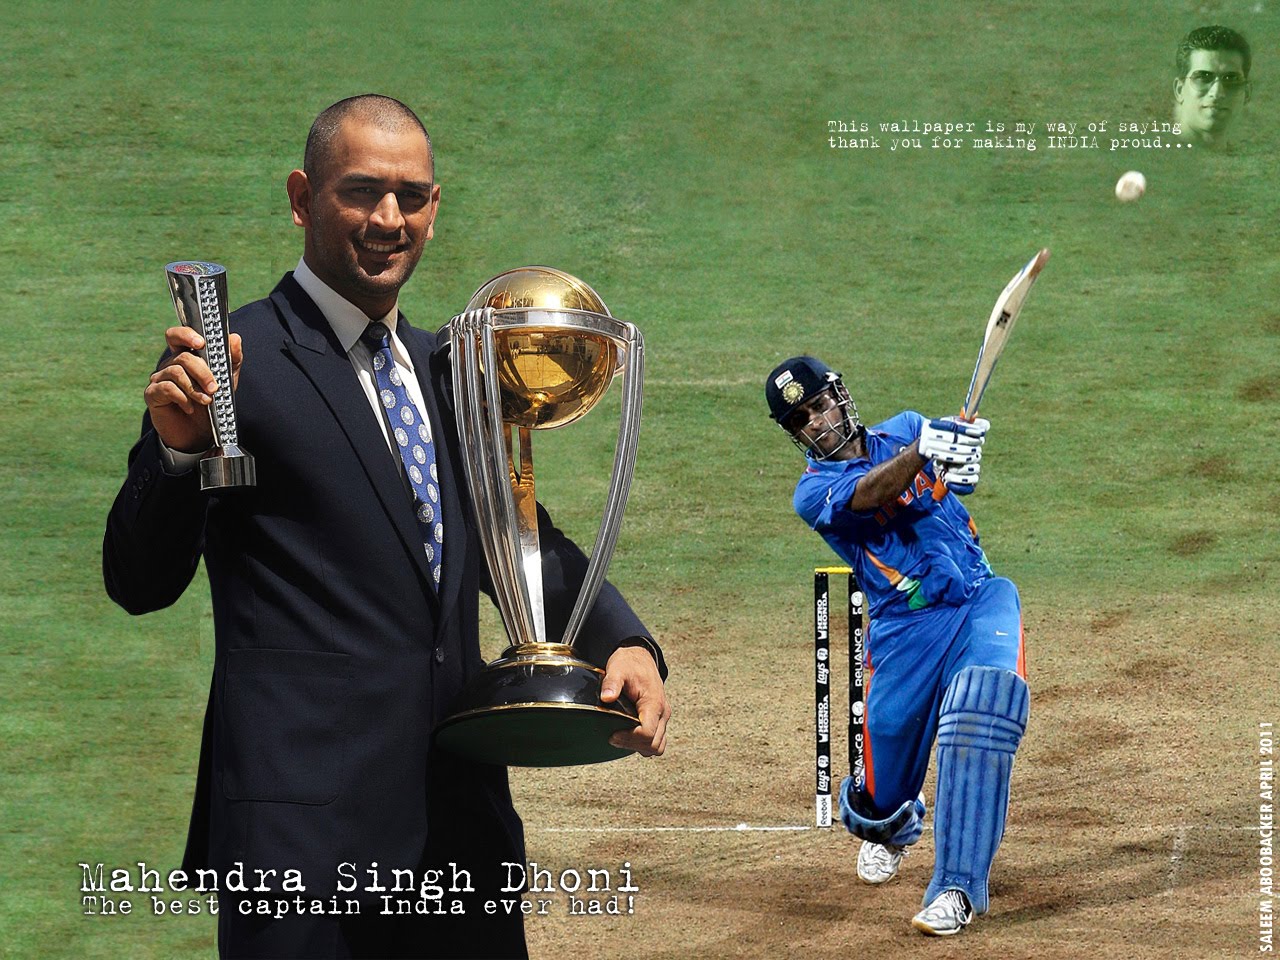 wallpaper created in celebration with India's Cricket World Cup ...